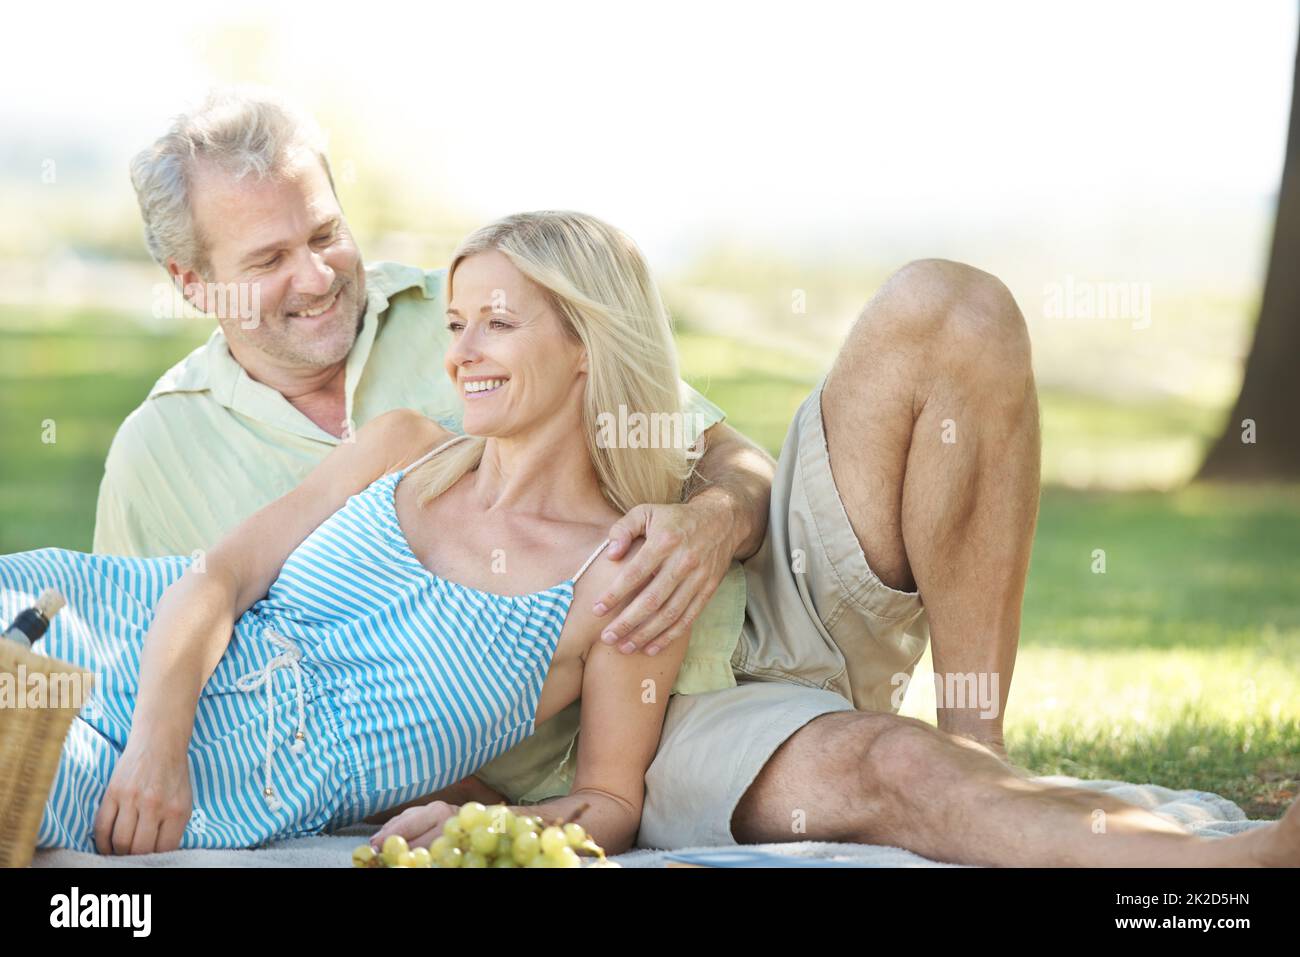 Loving moments in the open air. A smiling husband and wife enjoying a leisurely picnic in the park. Stock Photo